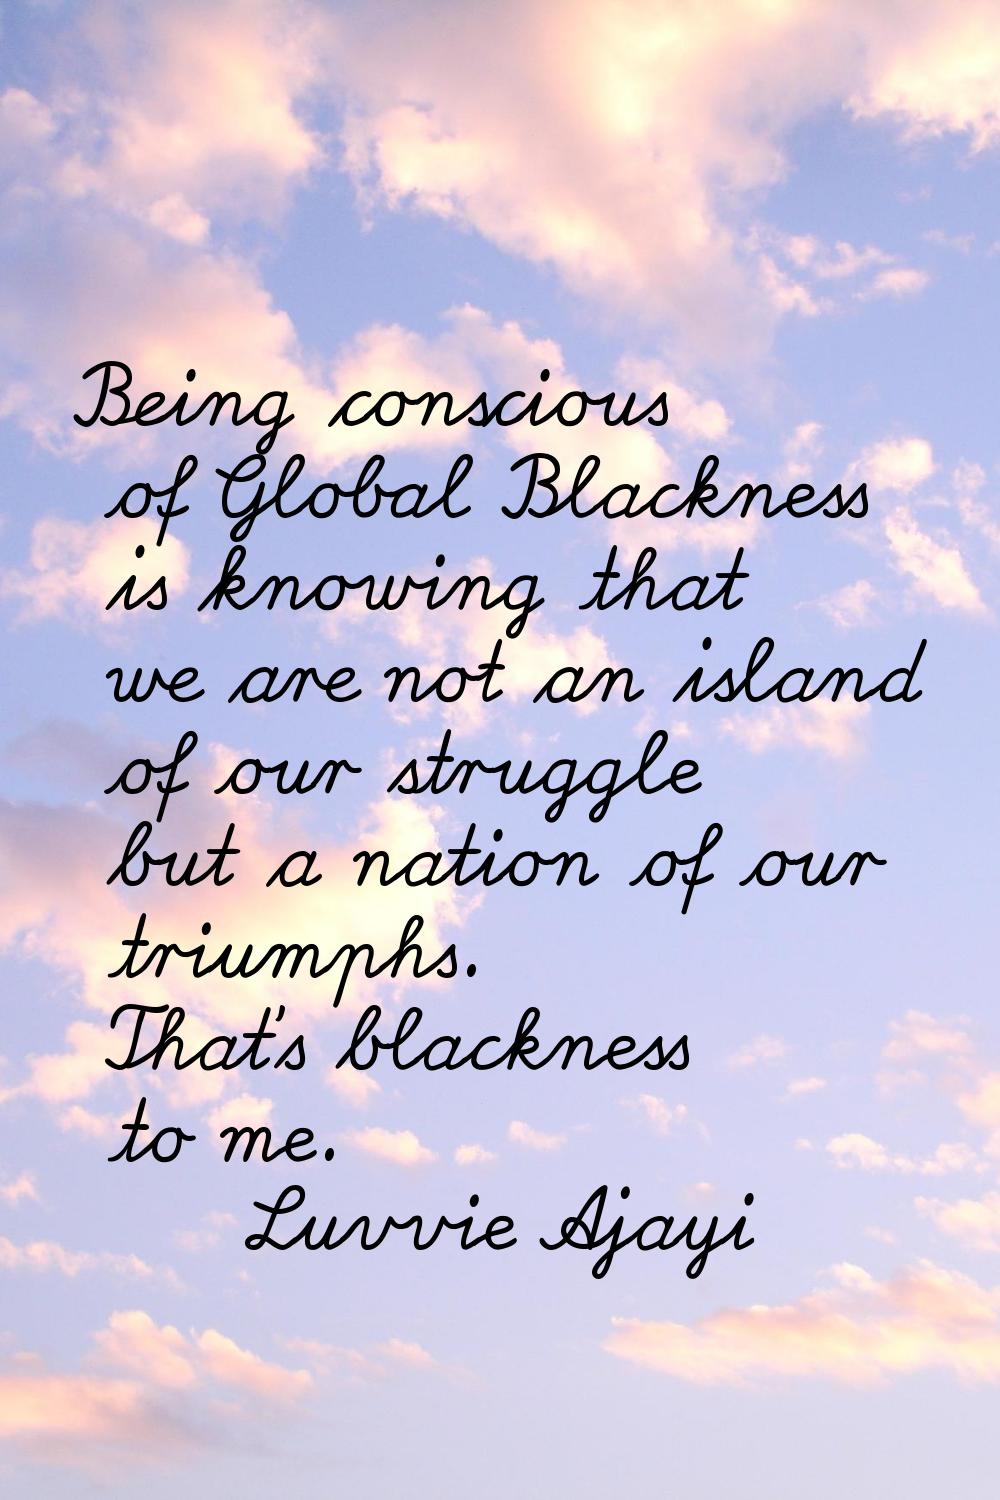 Being conscious of Global Blackness is knowing that we are not an island of our struggle but a nati